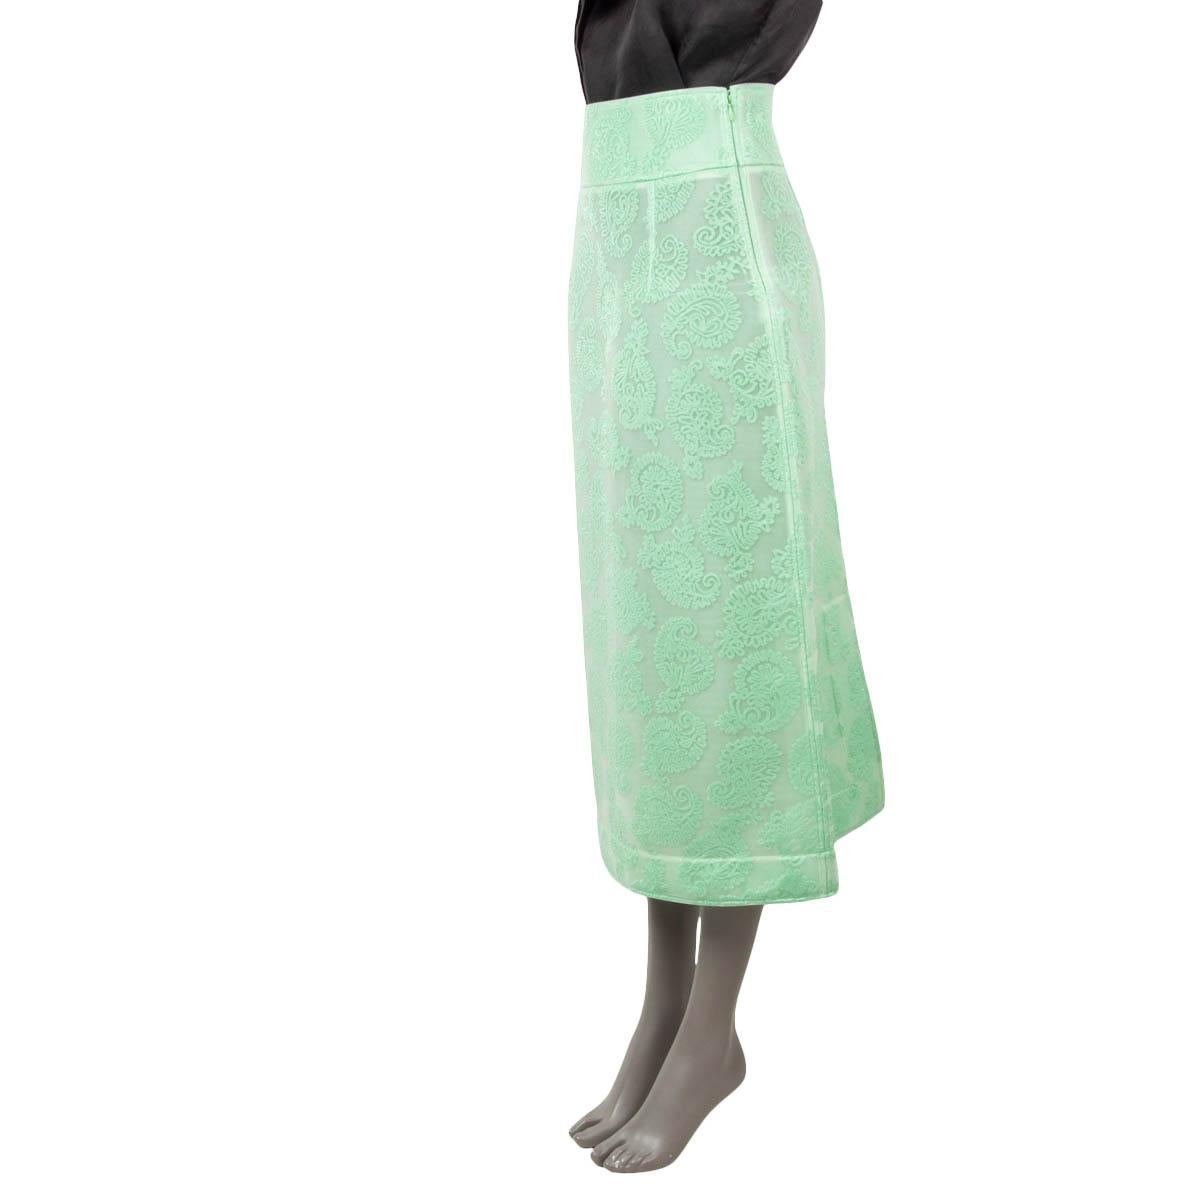 100% authentic Jil Sander jacquard chenille midi A-line skirt in pastel green viscose (51%) and polyamide (49%) missing tag. Features a hand-embroidered with intricate chenille paisley, A-line shape and a wide high-rise waistband. Opens with